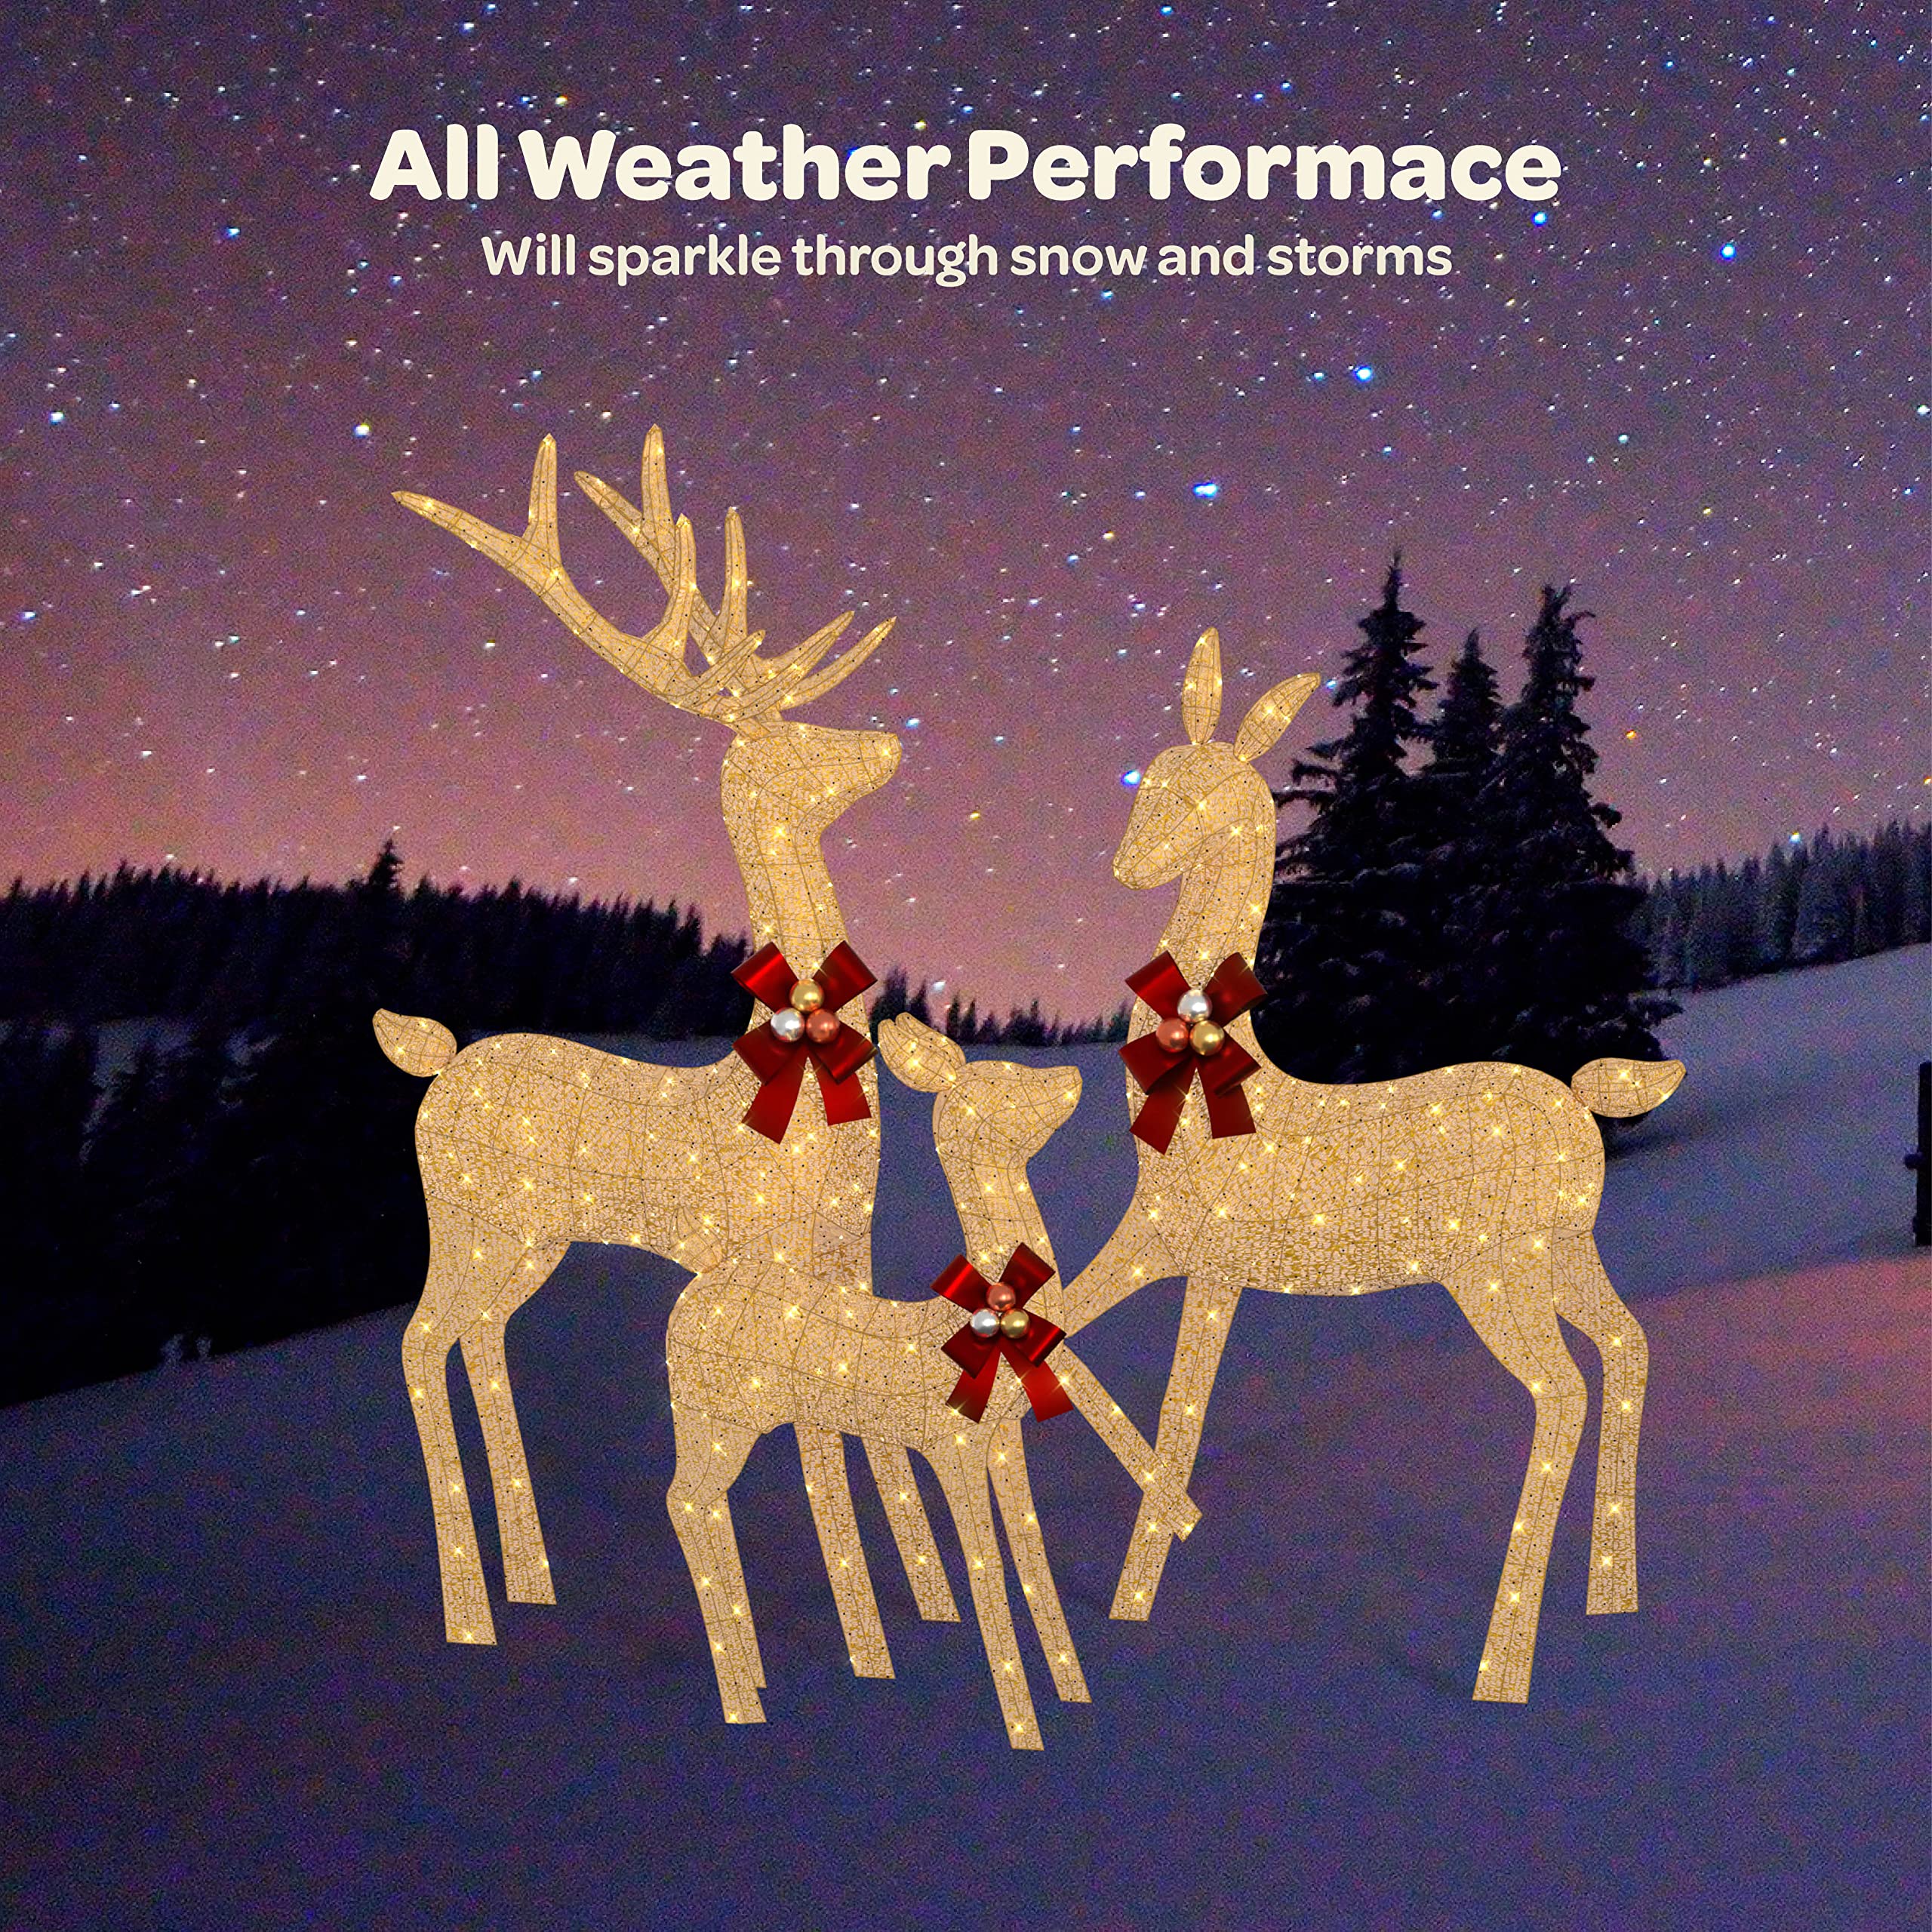 Impressive Reindeer Christmas Decoration Family [Set of 3] Lighted with 365 LED Lights Large all-Weather Christmas Outdoor Decoration Display (Buck Doe and Fawn) With Red Bows/Tie-Down Stakes - Gold. christmas decorations outdoor reindeer  - Very Good